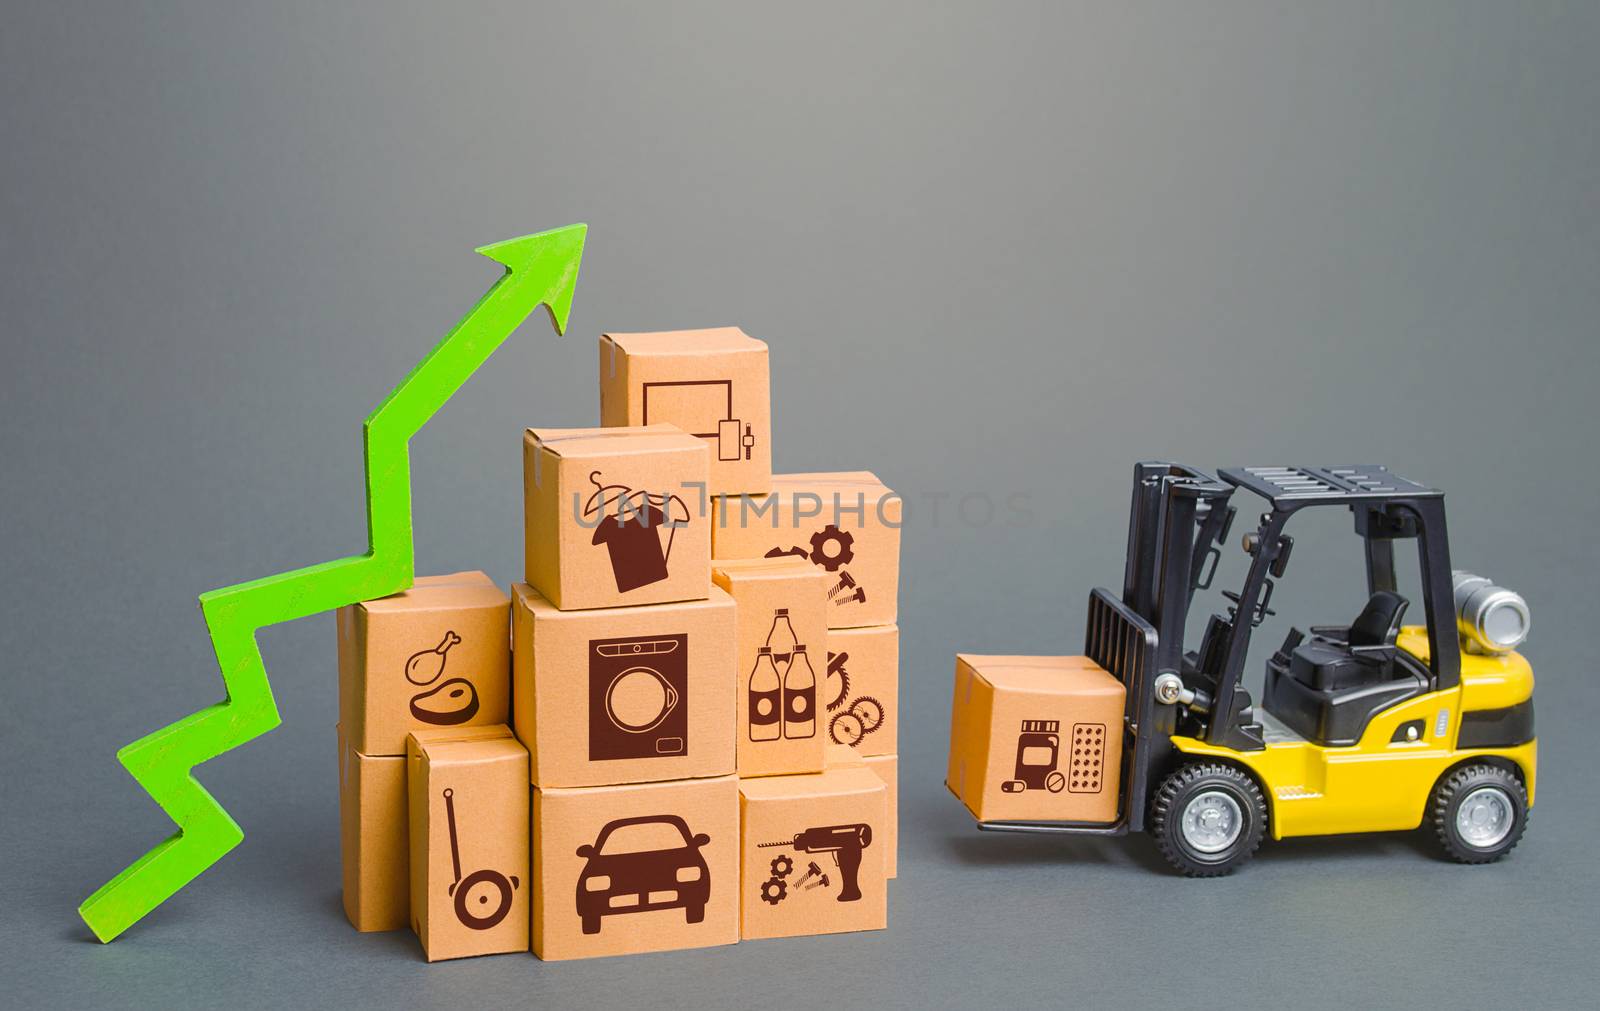 Forklift next to boxes and green up arrow. Logistics, transport infrastructure. Growth of online distribution of goods, increased delivery. E-commerce. High demand and sales. Economic recovery. by iLixe48